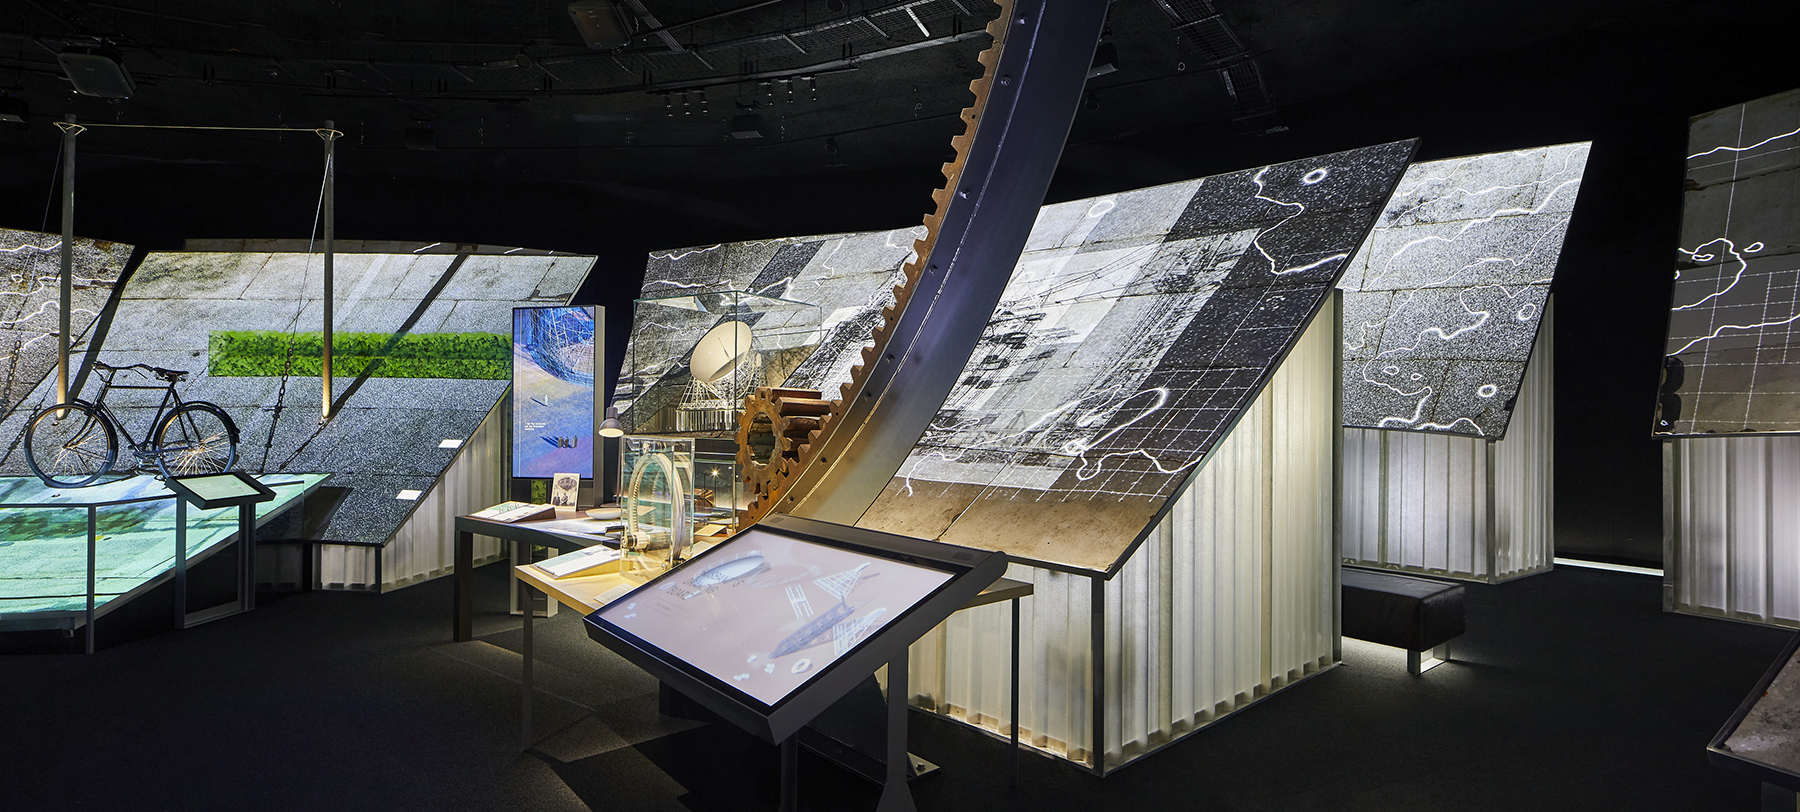 Displays within the central exhibition hall. (Image courtesy of the University of Manchester)